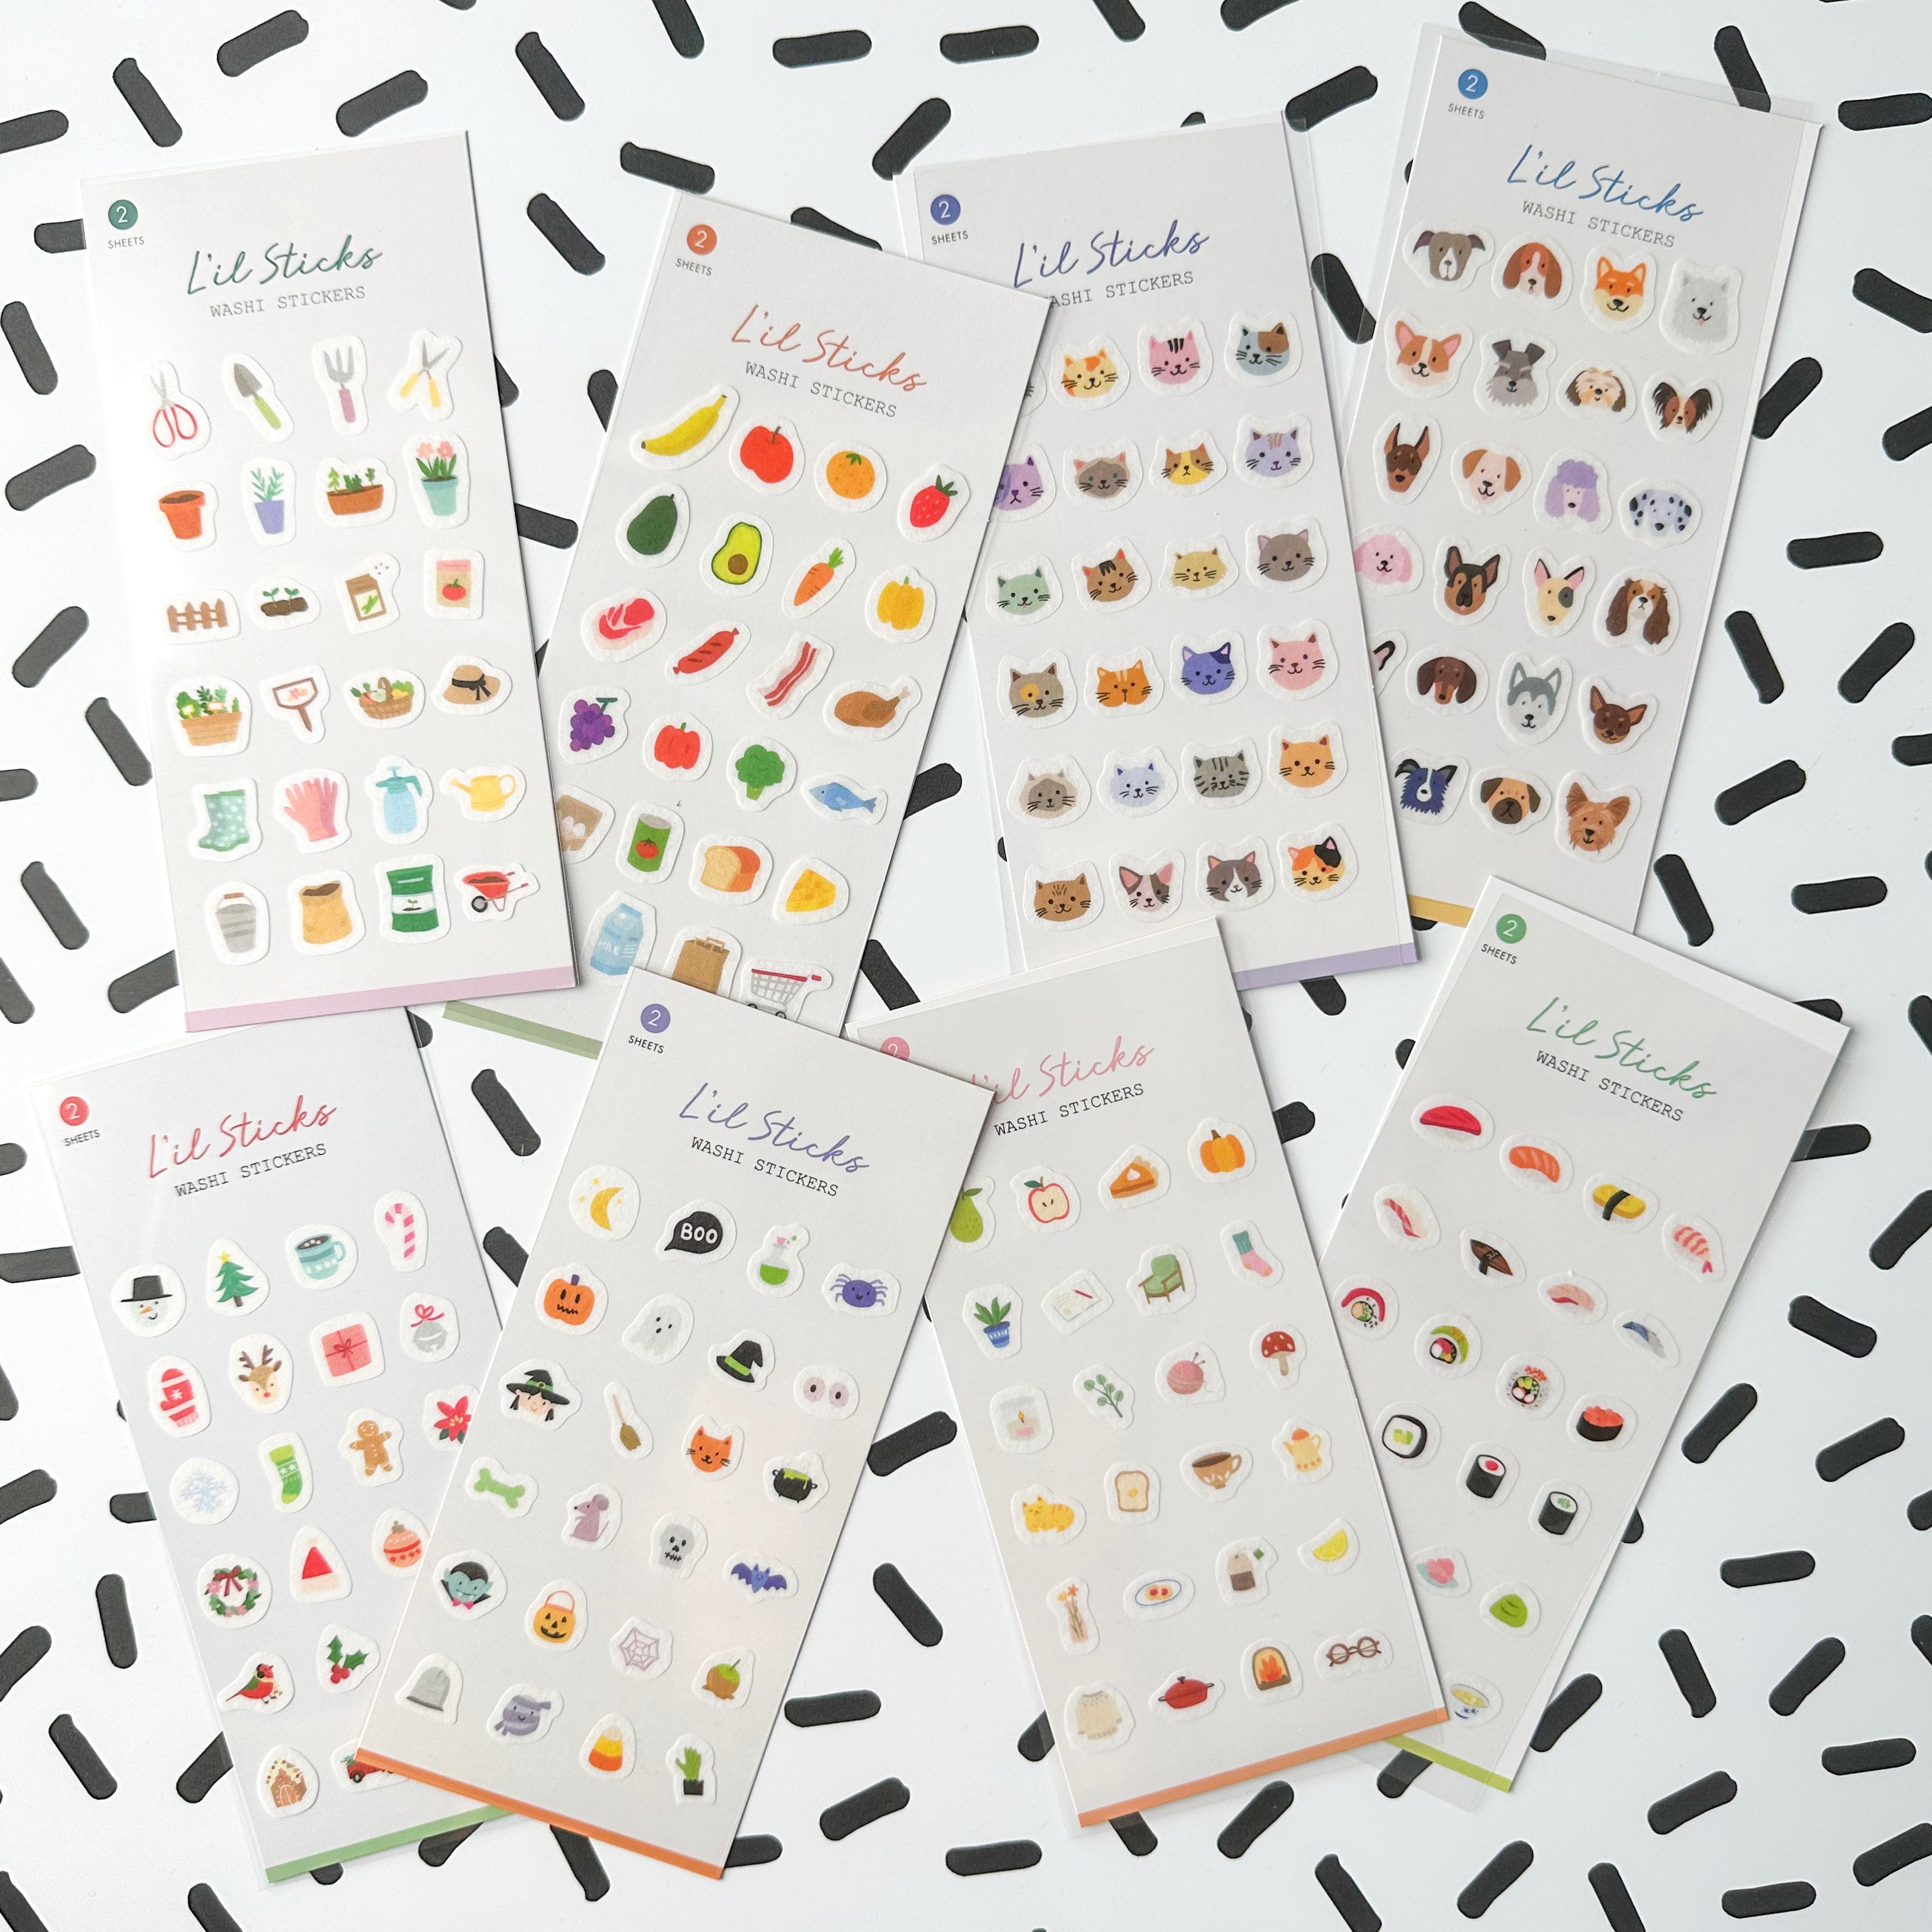 These stickers are carefully crafted with intricate details, offering a charming assortment of designs that are ideal for planning, marking important events, or adding decorative touches to your pages. These are from Girl of all Work and sold at BBB Supplies Craft Shop.